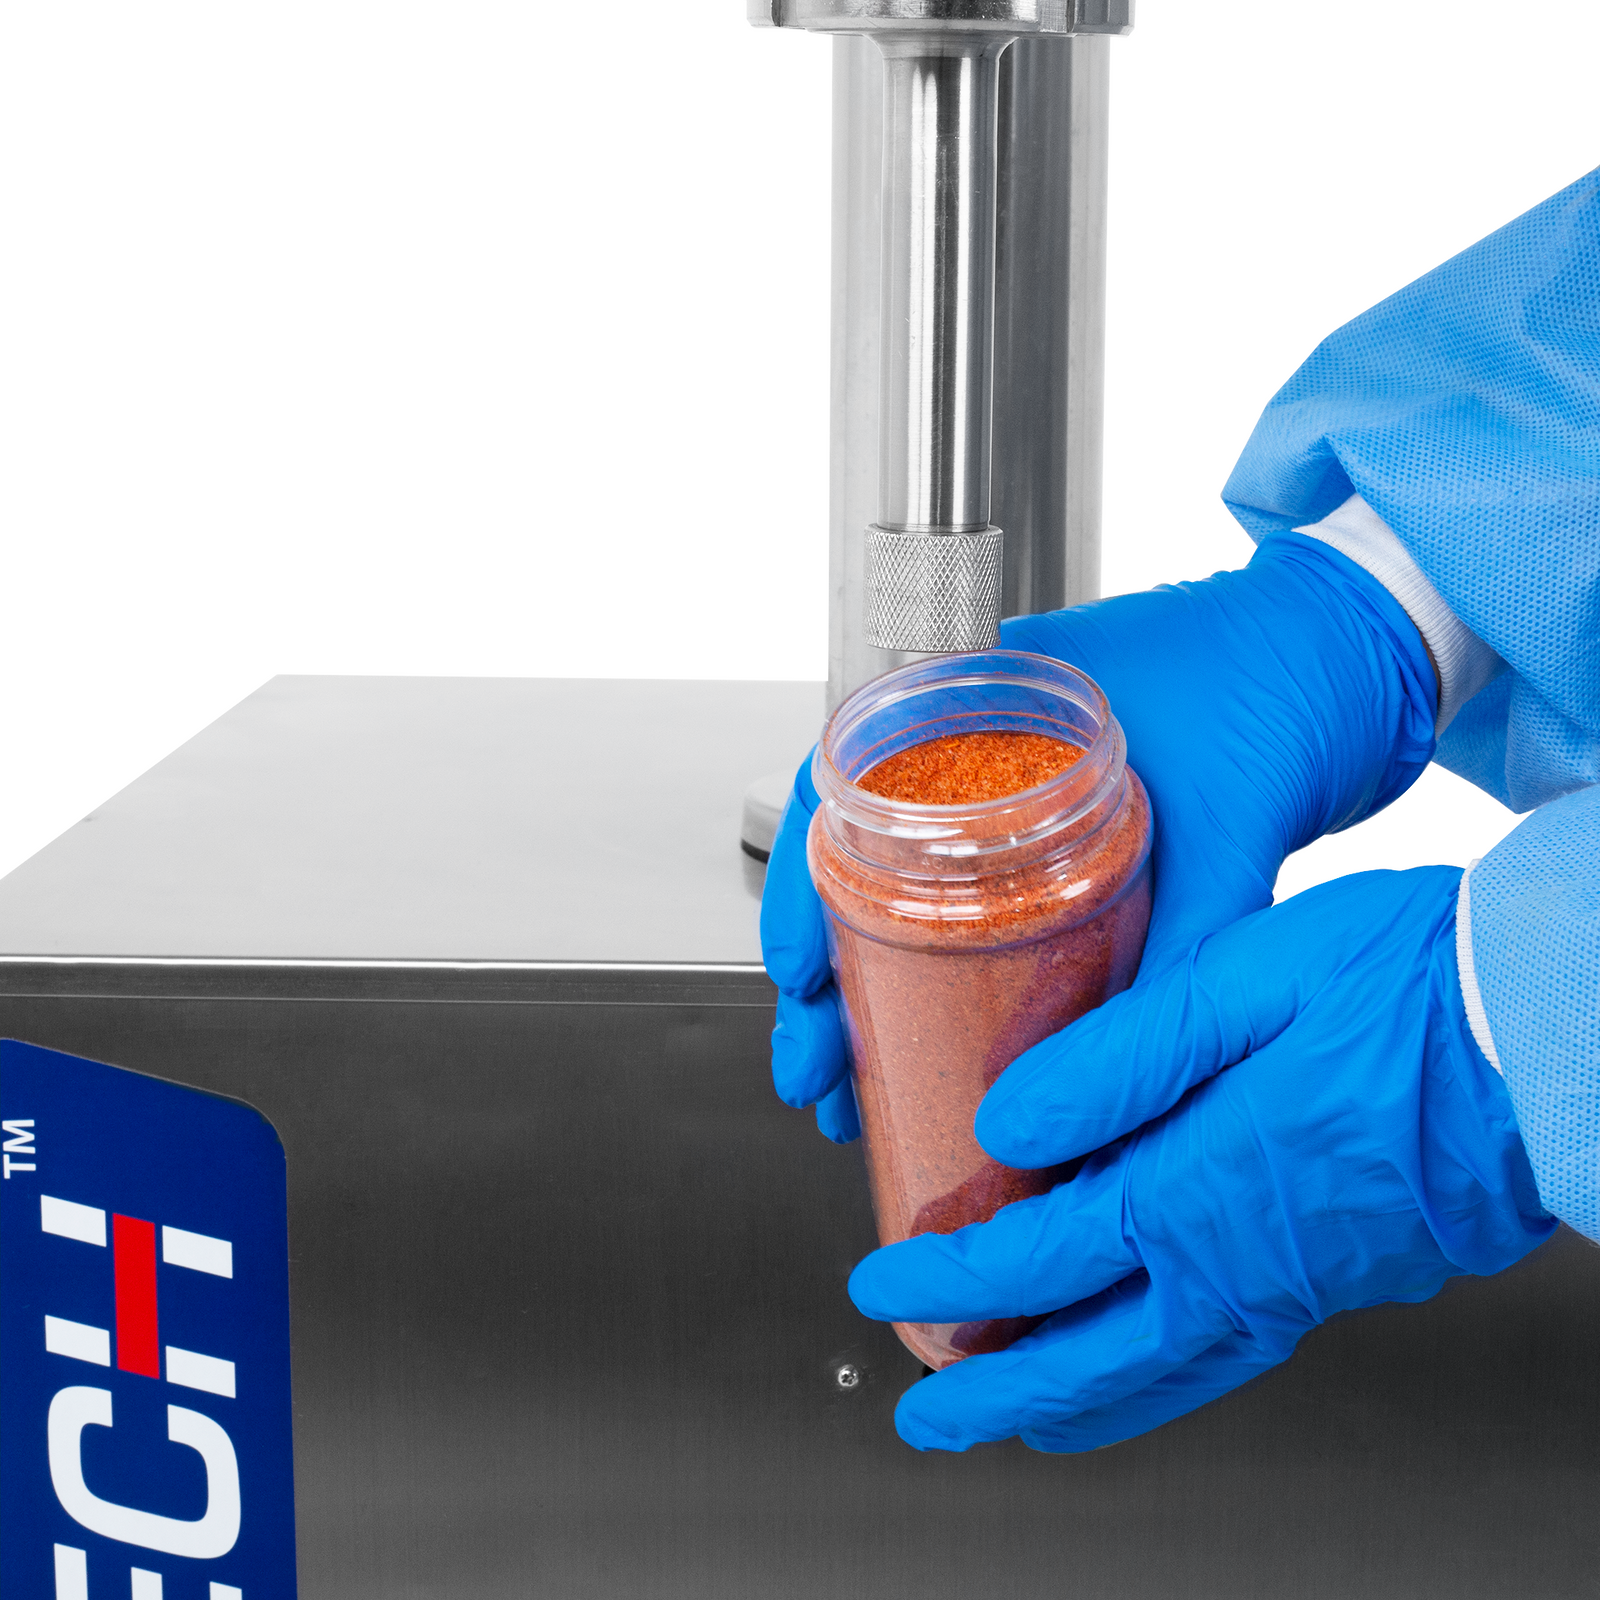 Close-up of the hands of a person with blue latex gloves and PPE holding a clear container filled with a red seasoning powder. The container is held under the dispensing nozzle of an auger powder filler, which was used to dispense seasoning powder into the container. 